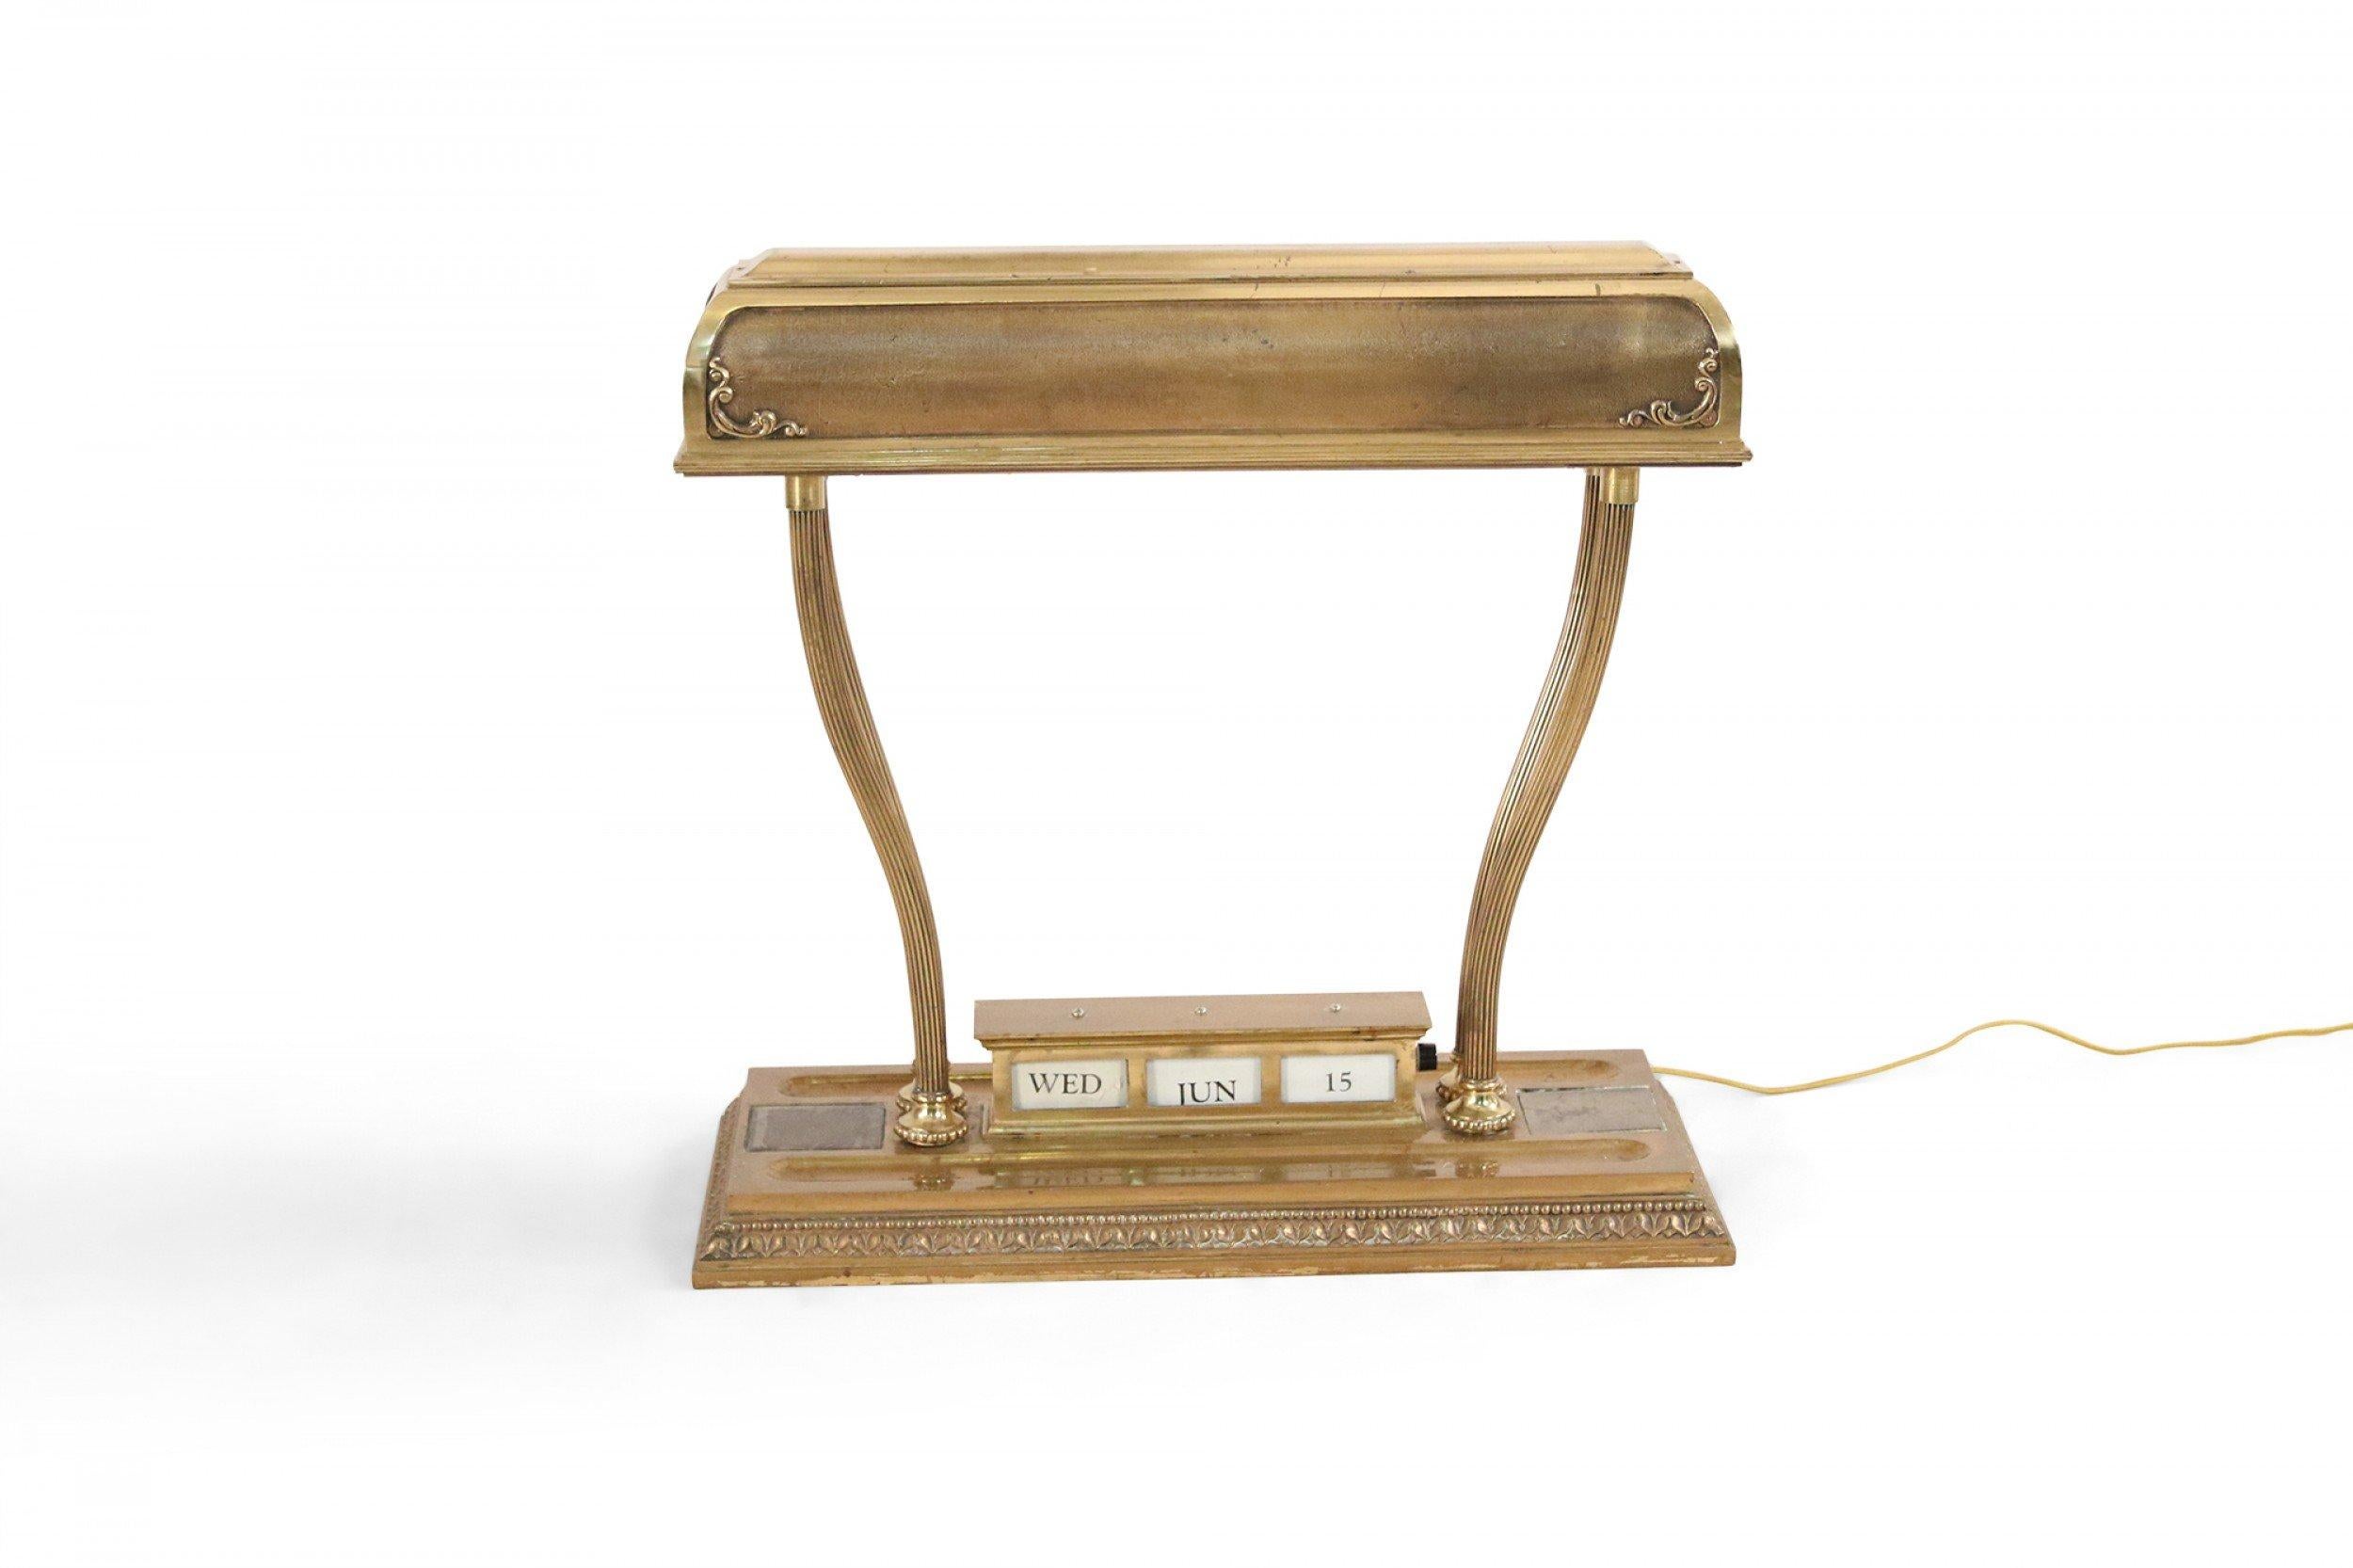 American Victorian large brass rectangular desk lamp with adjustable calendar display on a rectangular base supporting a large brass shade.